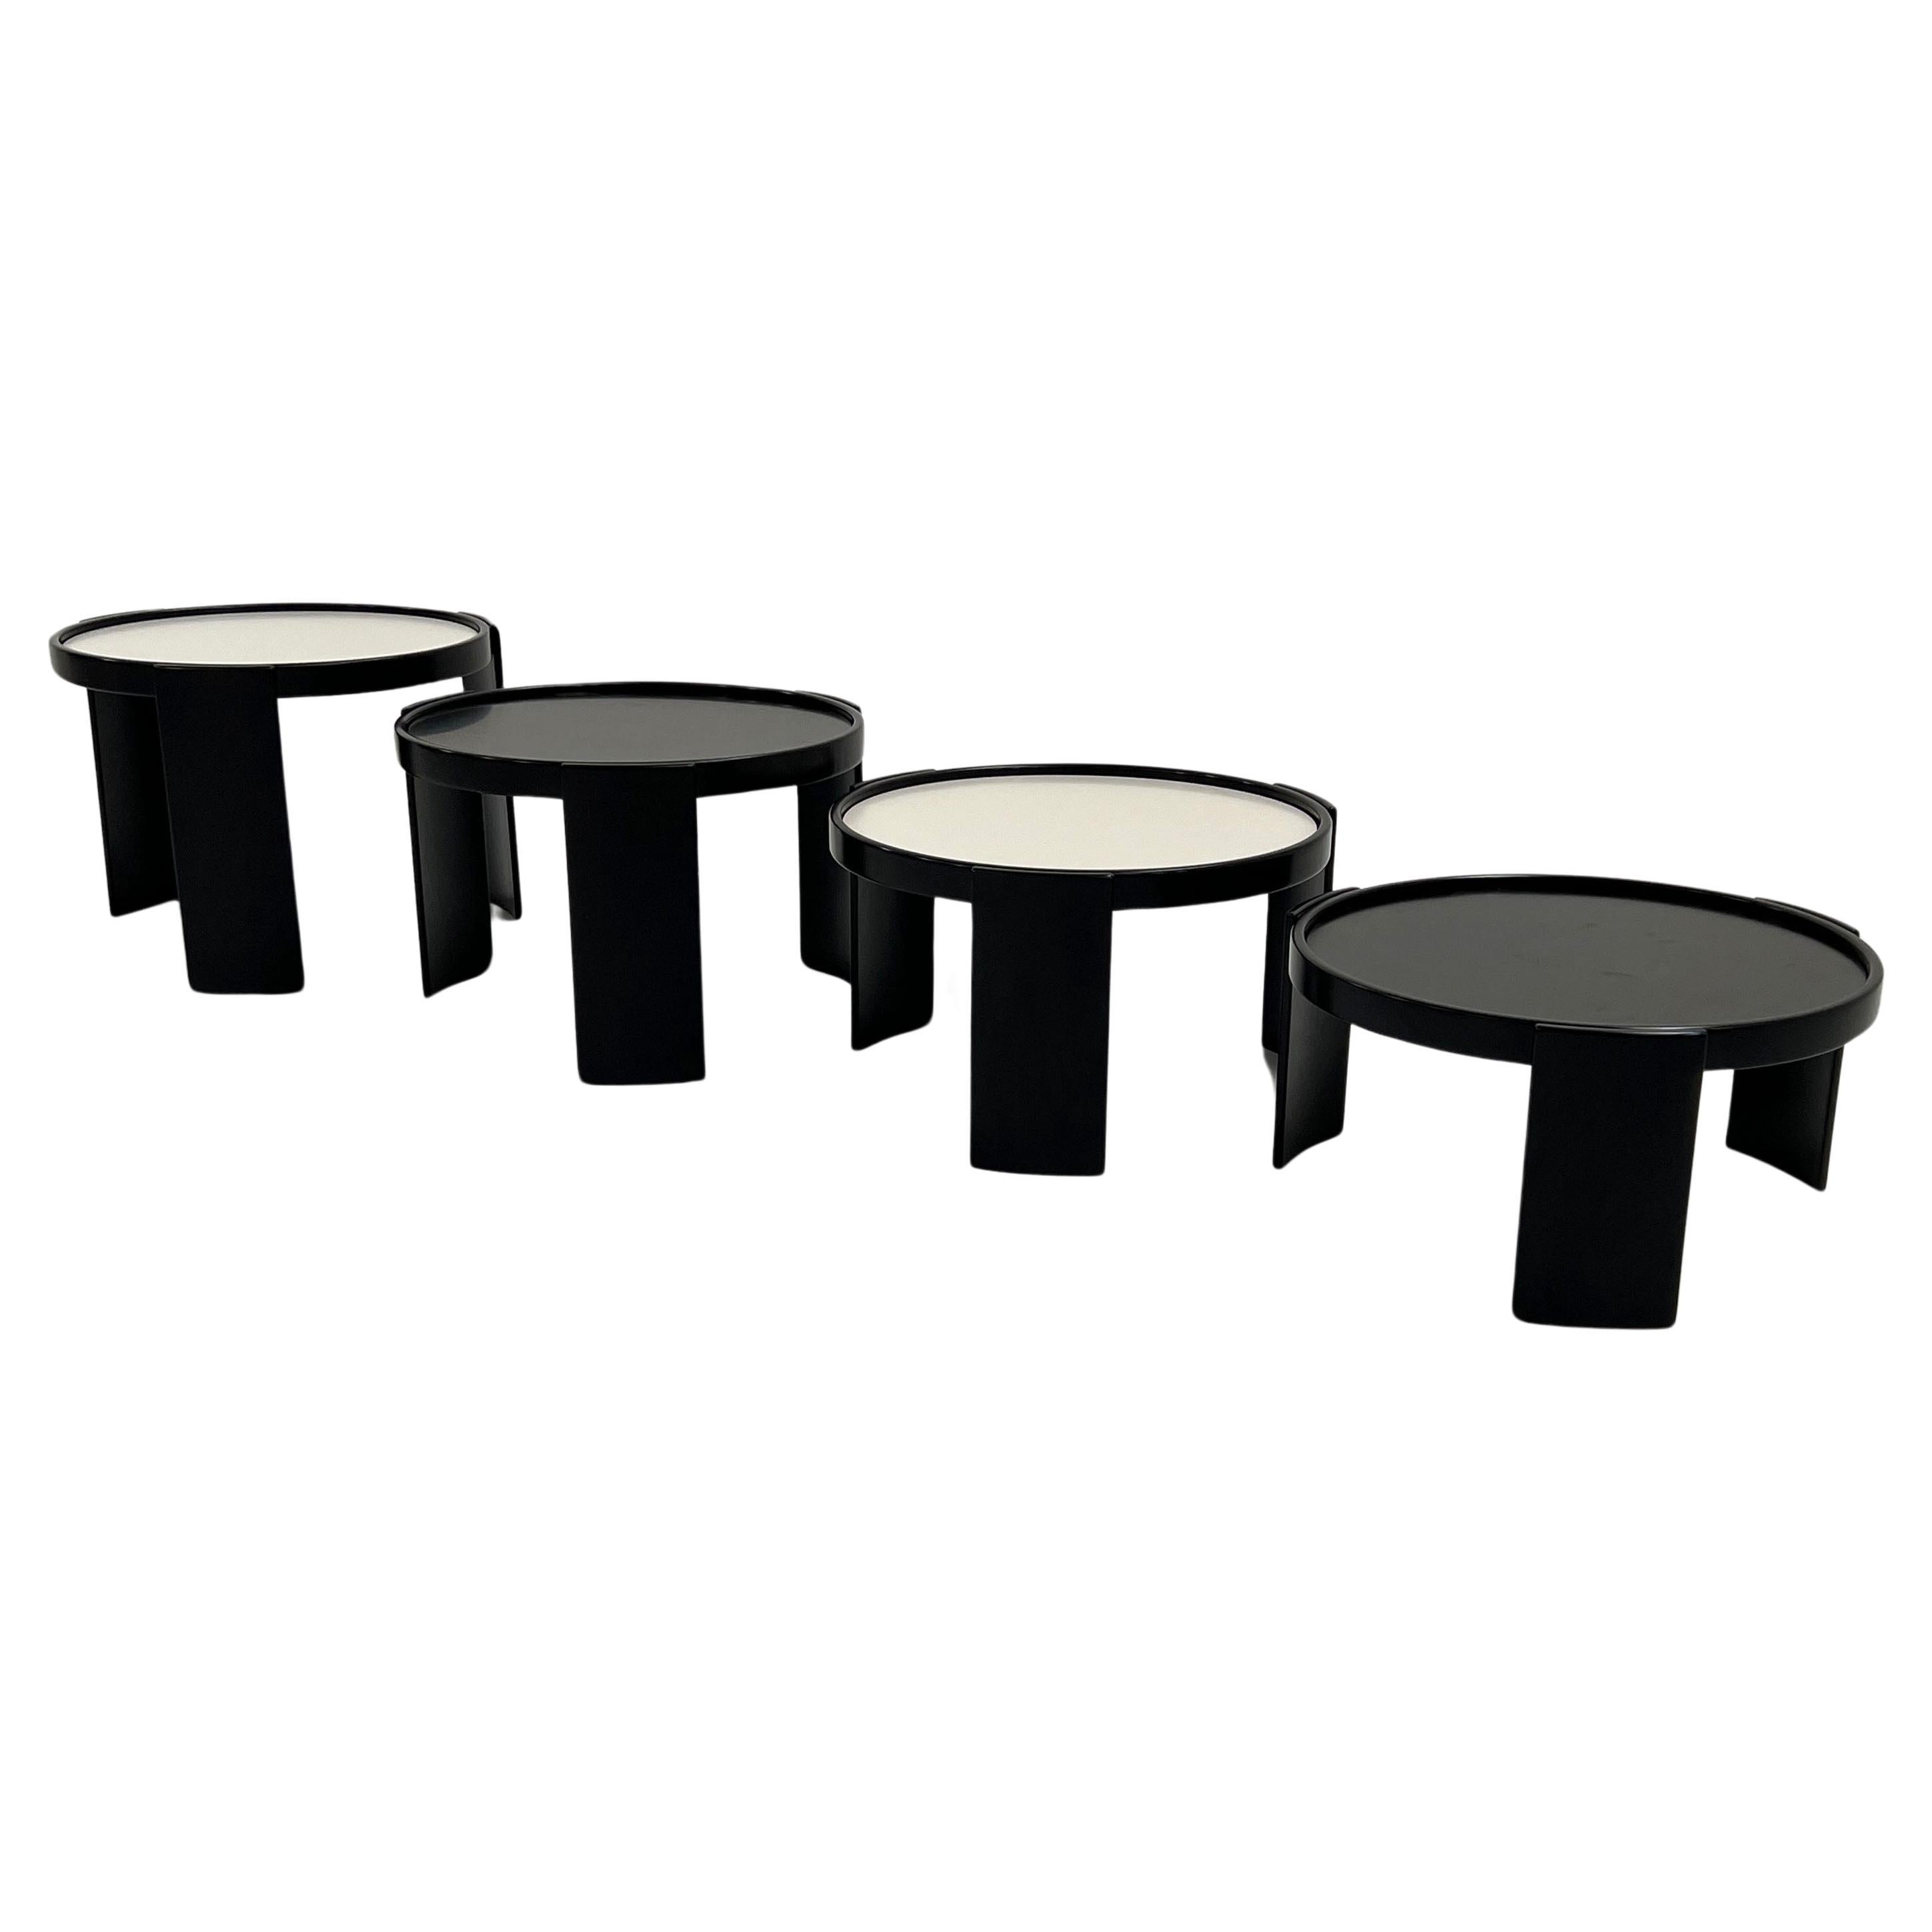 Set of Large Reversible Nesting Tables by Gianfranco Frattini for Cassina, 1960s For Sale